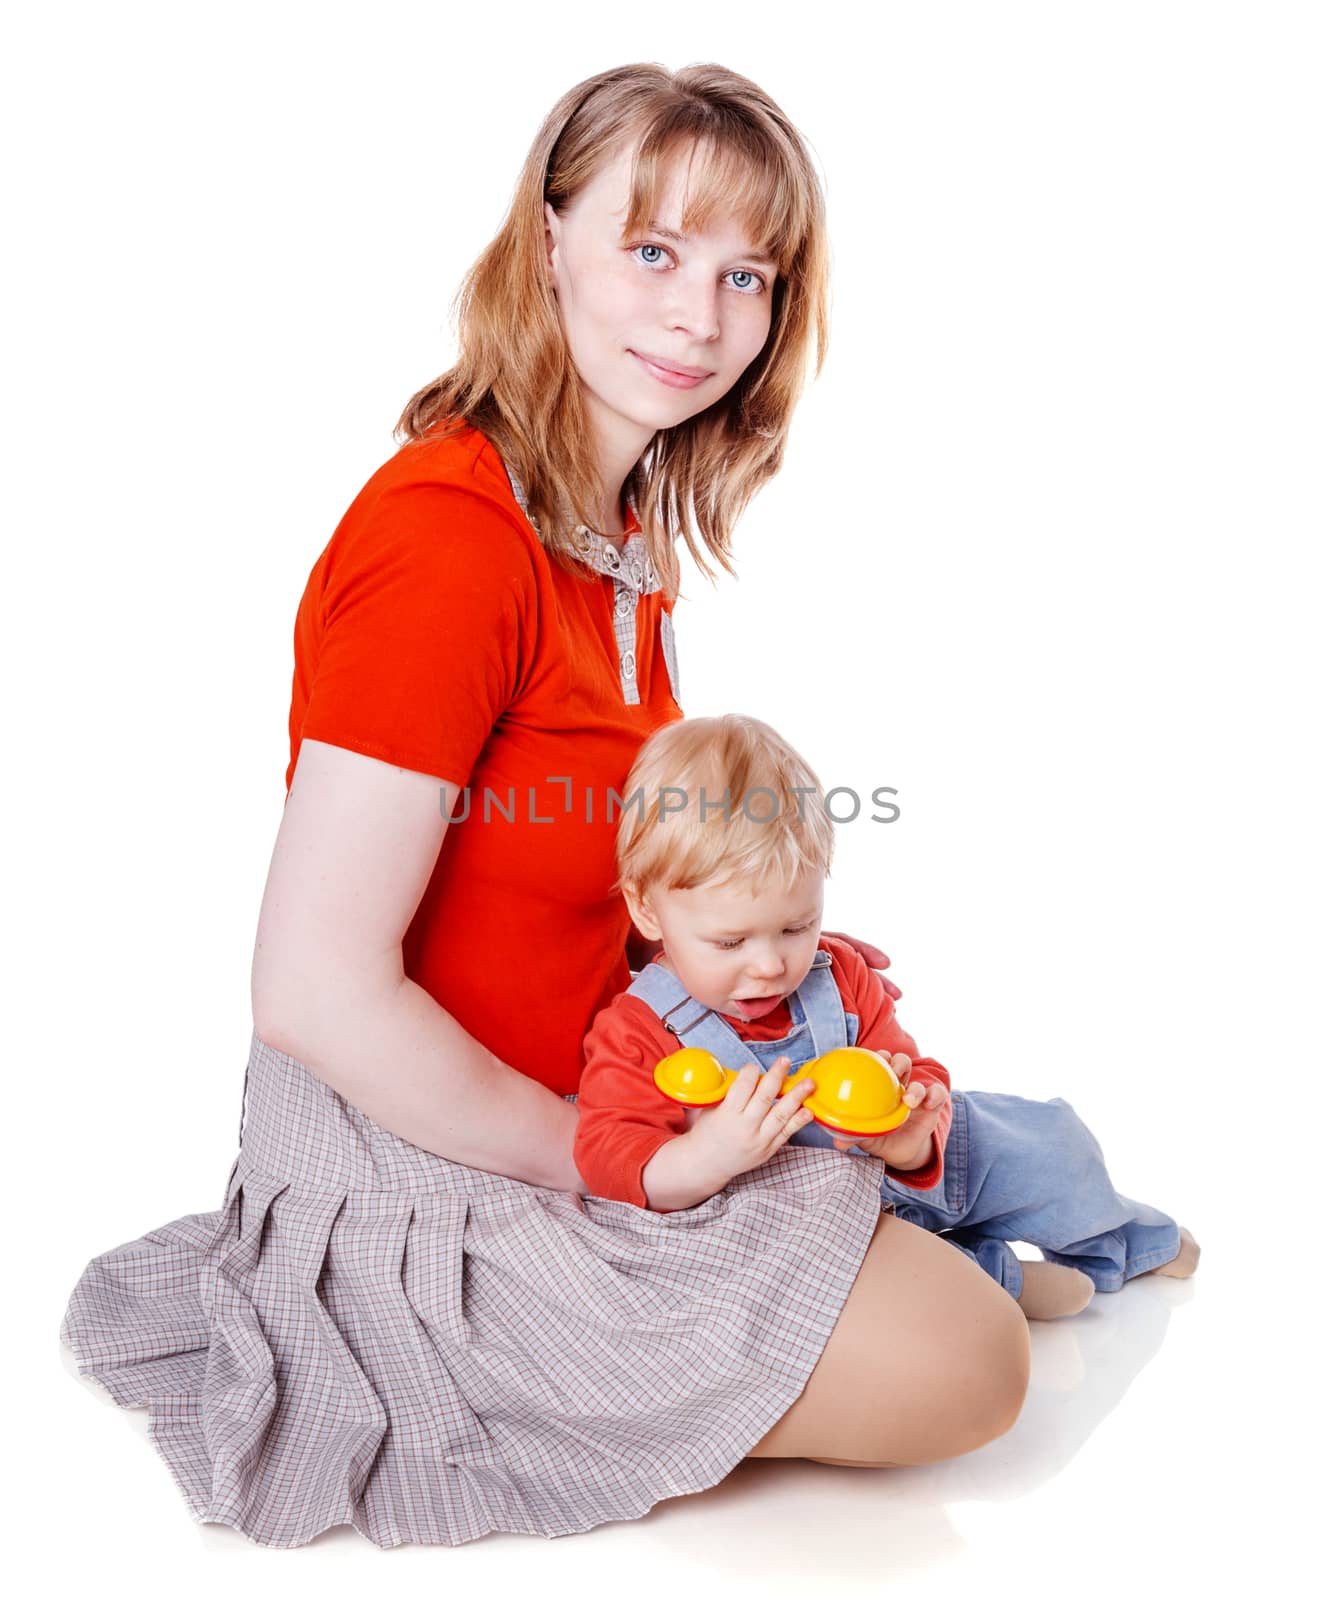 Mother with son sitting posing isolated on white